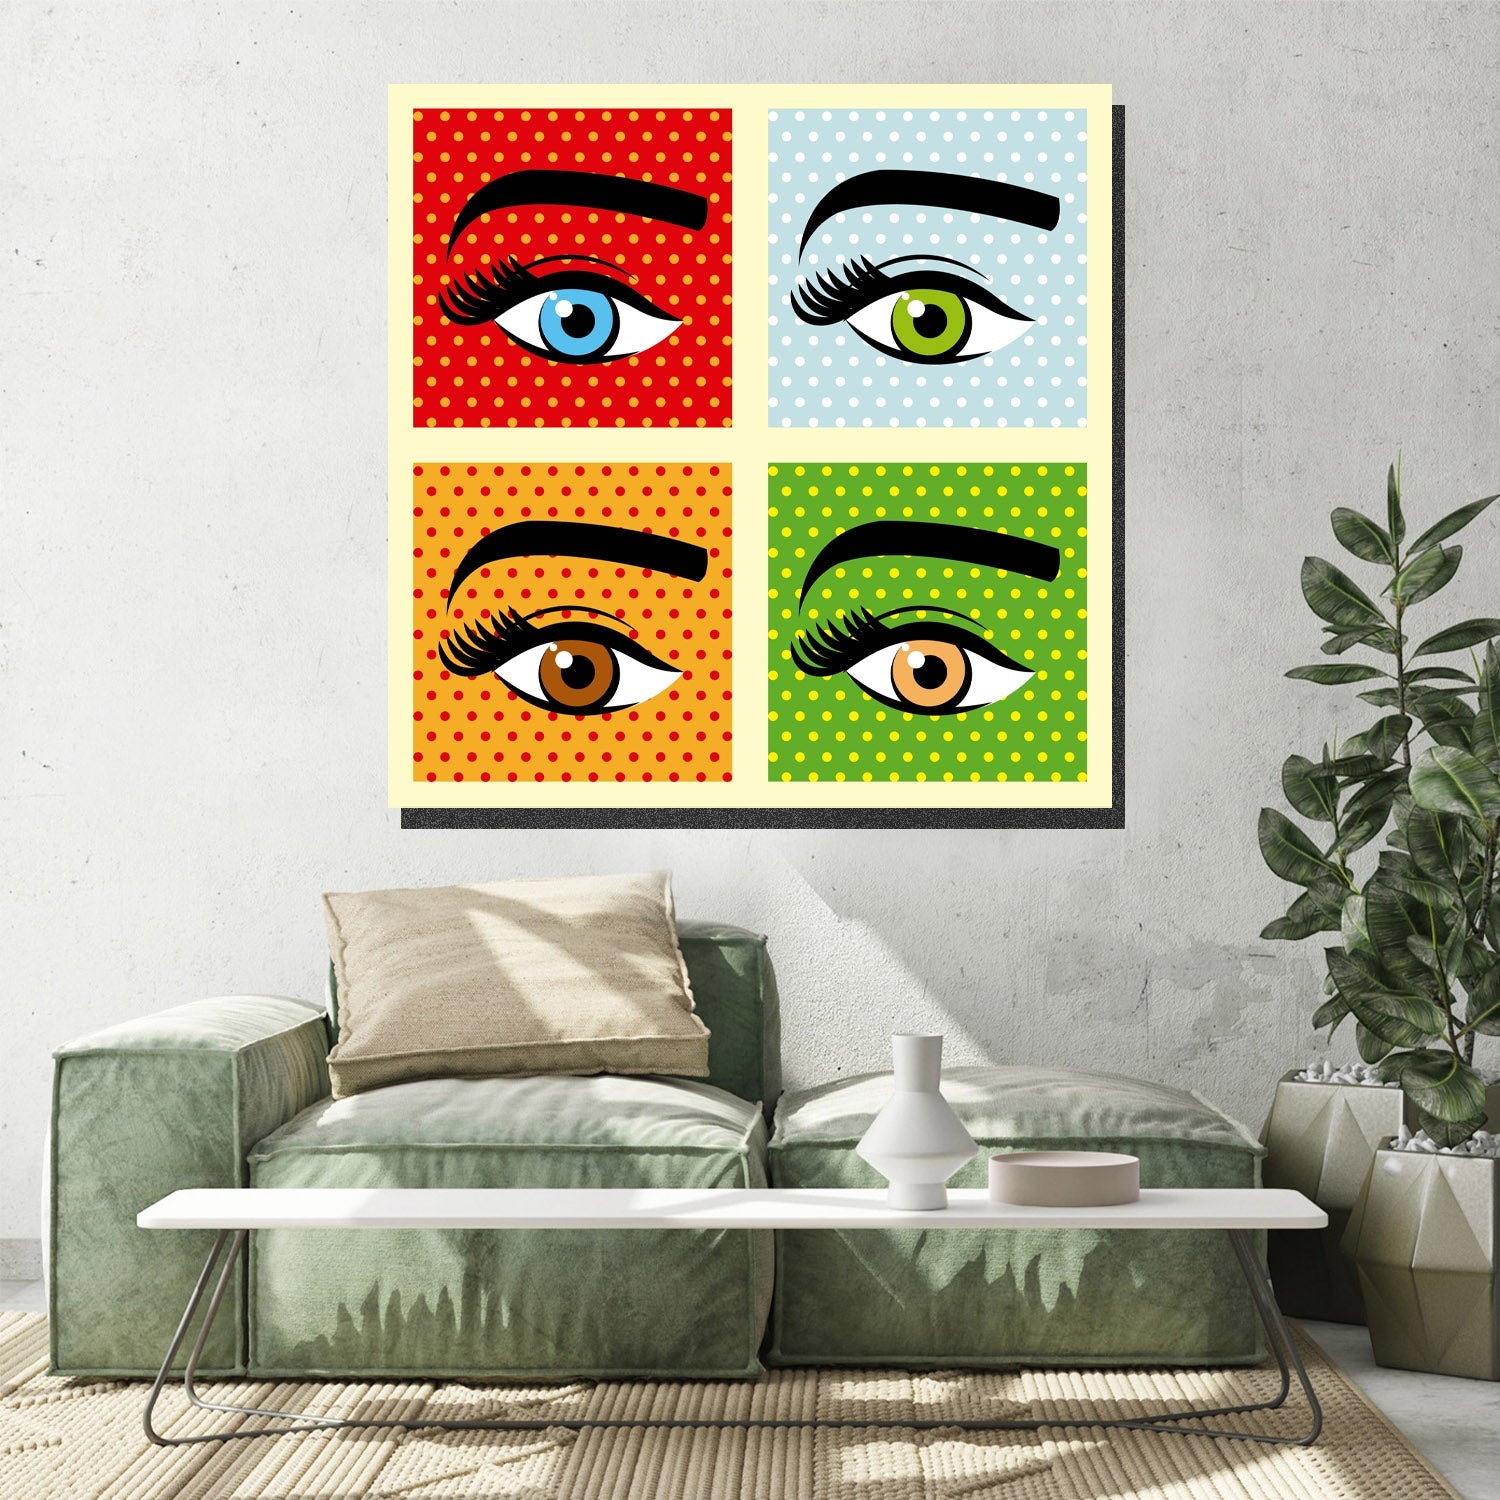 https://cdn.shopify.com/s/files/1/0387/9986/8044/products/EyesonYouCanvasArtprintStretched-4.jpg